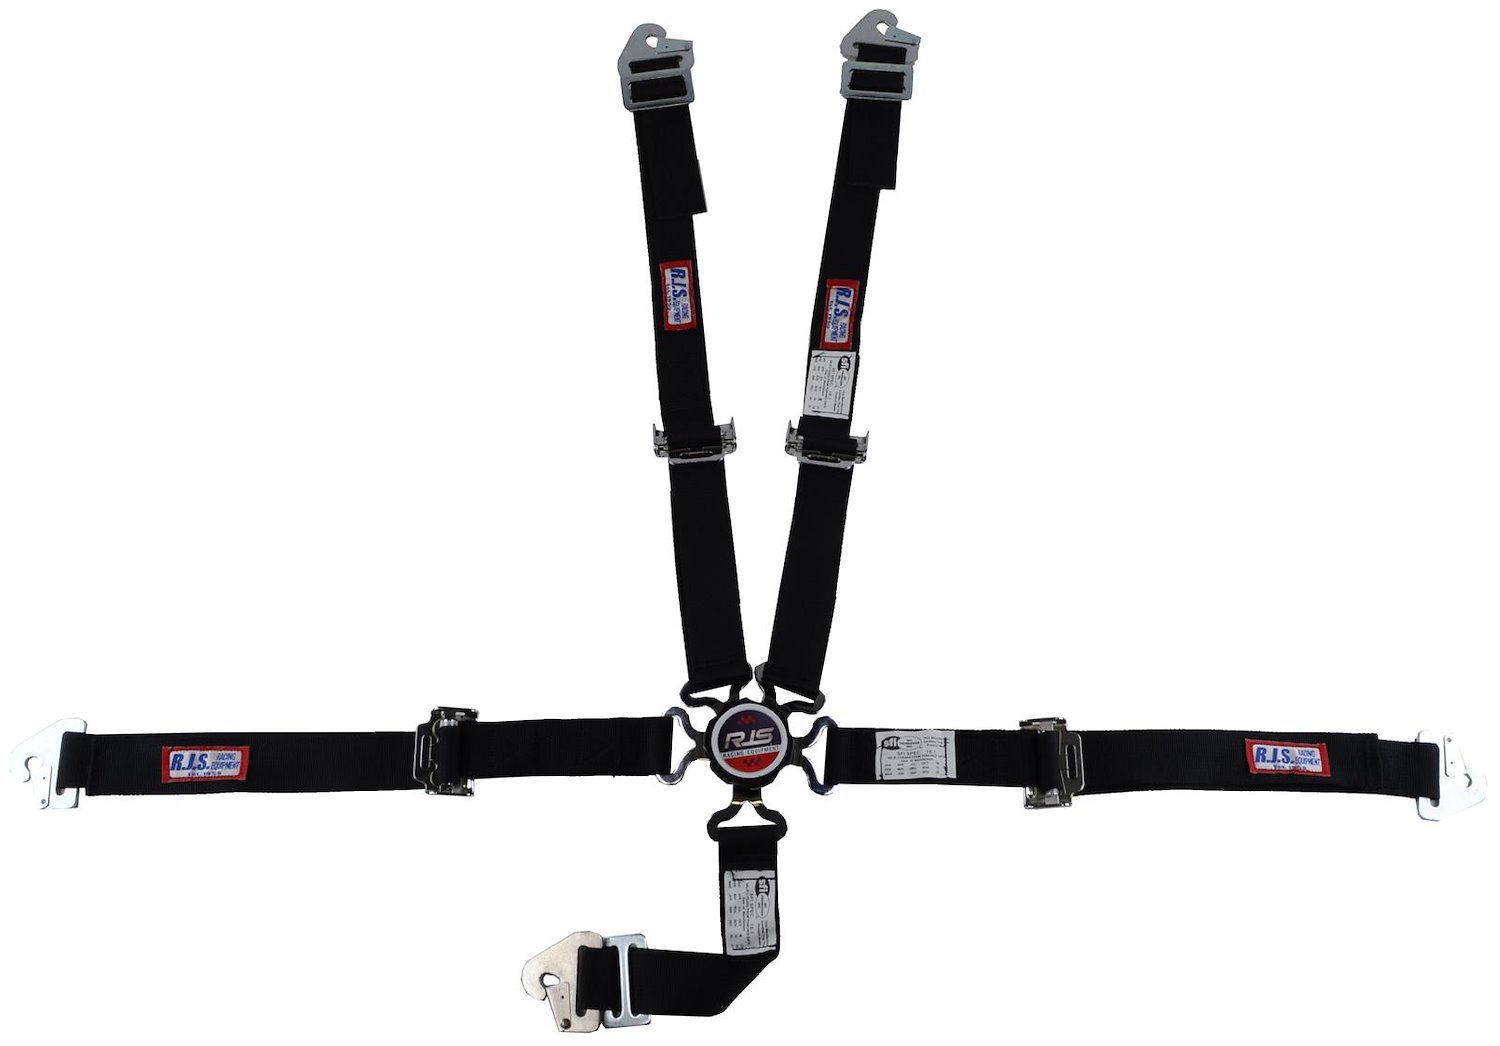 SFI 16.1 CAM-LOCK HARNESS 2 PULL UP Lap Belt 2 Shoulder Harness Individual FLOOR Mount 2 DOUBLESub ALL WRAP ENDS PURPLE